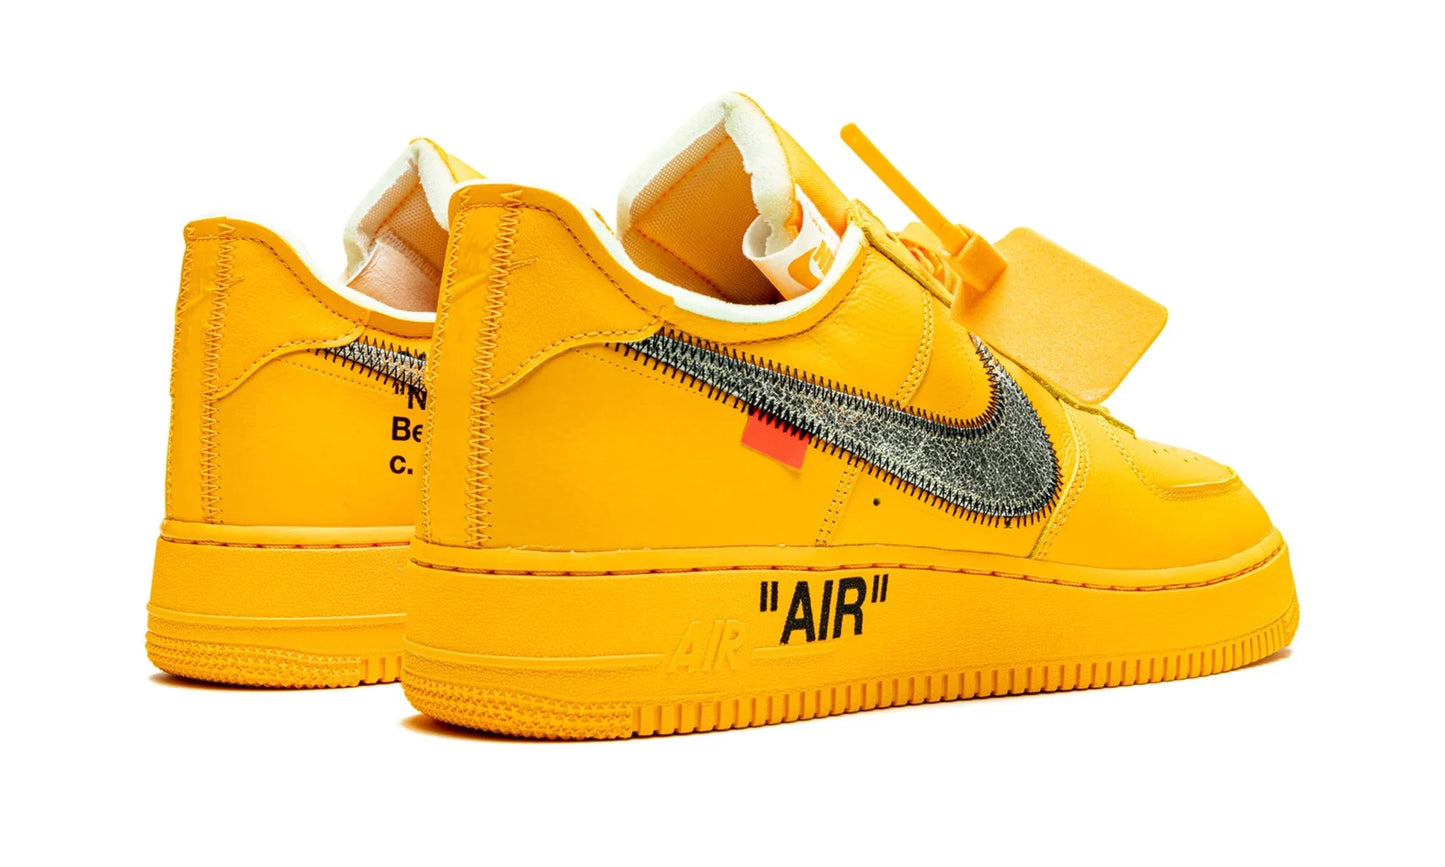 NIKE X OFF-WHITE AIR FORCE 1 LOW "Off-White - University Gold"